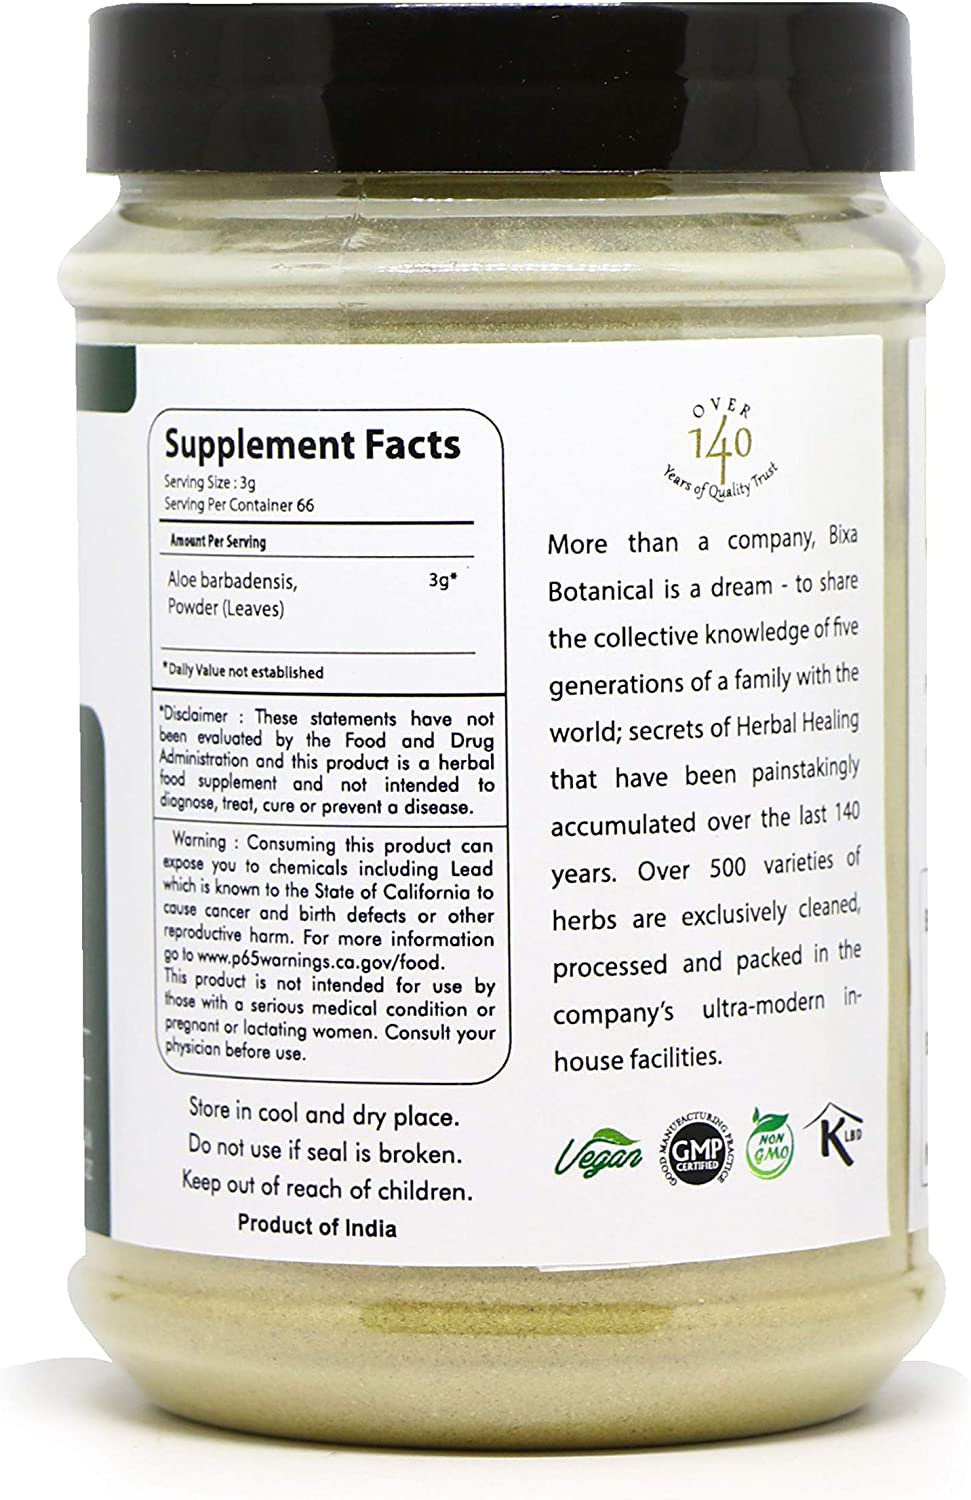 Aloe Vera Leaf Powder - 7 Oz / 200Gm, (Aloe Barbadensis), Promotes Healthy Digestion & Liver Functions L Natural Herbal Moisturizer for Skin, Face & Hair Care | after Sun Care and Sunburn Relief.